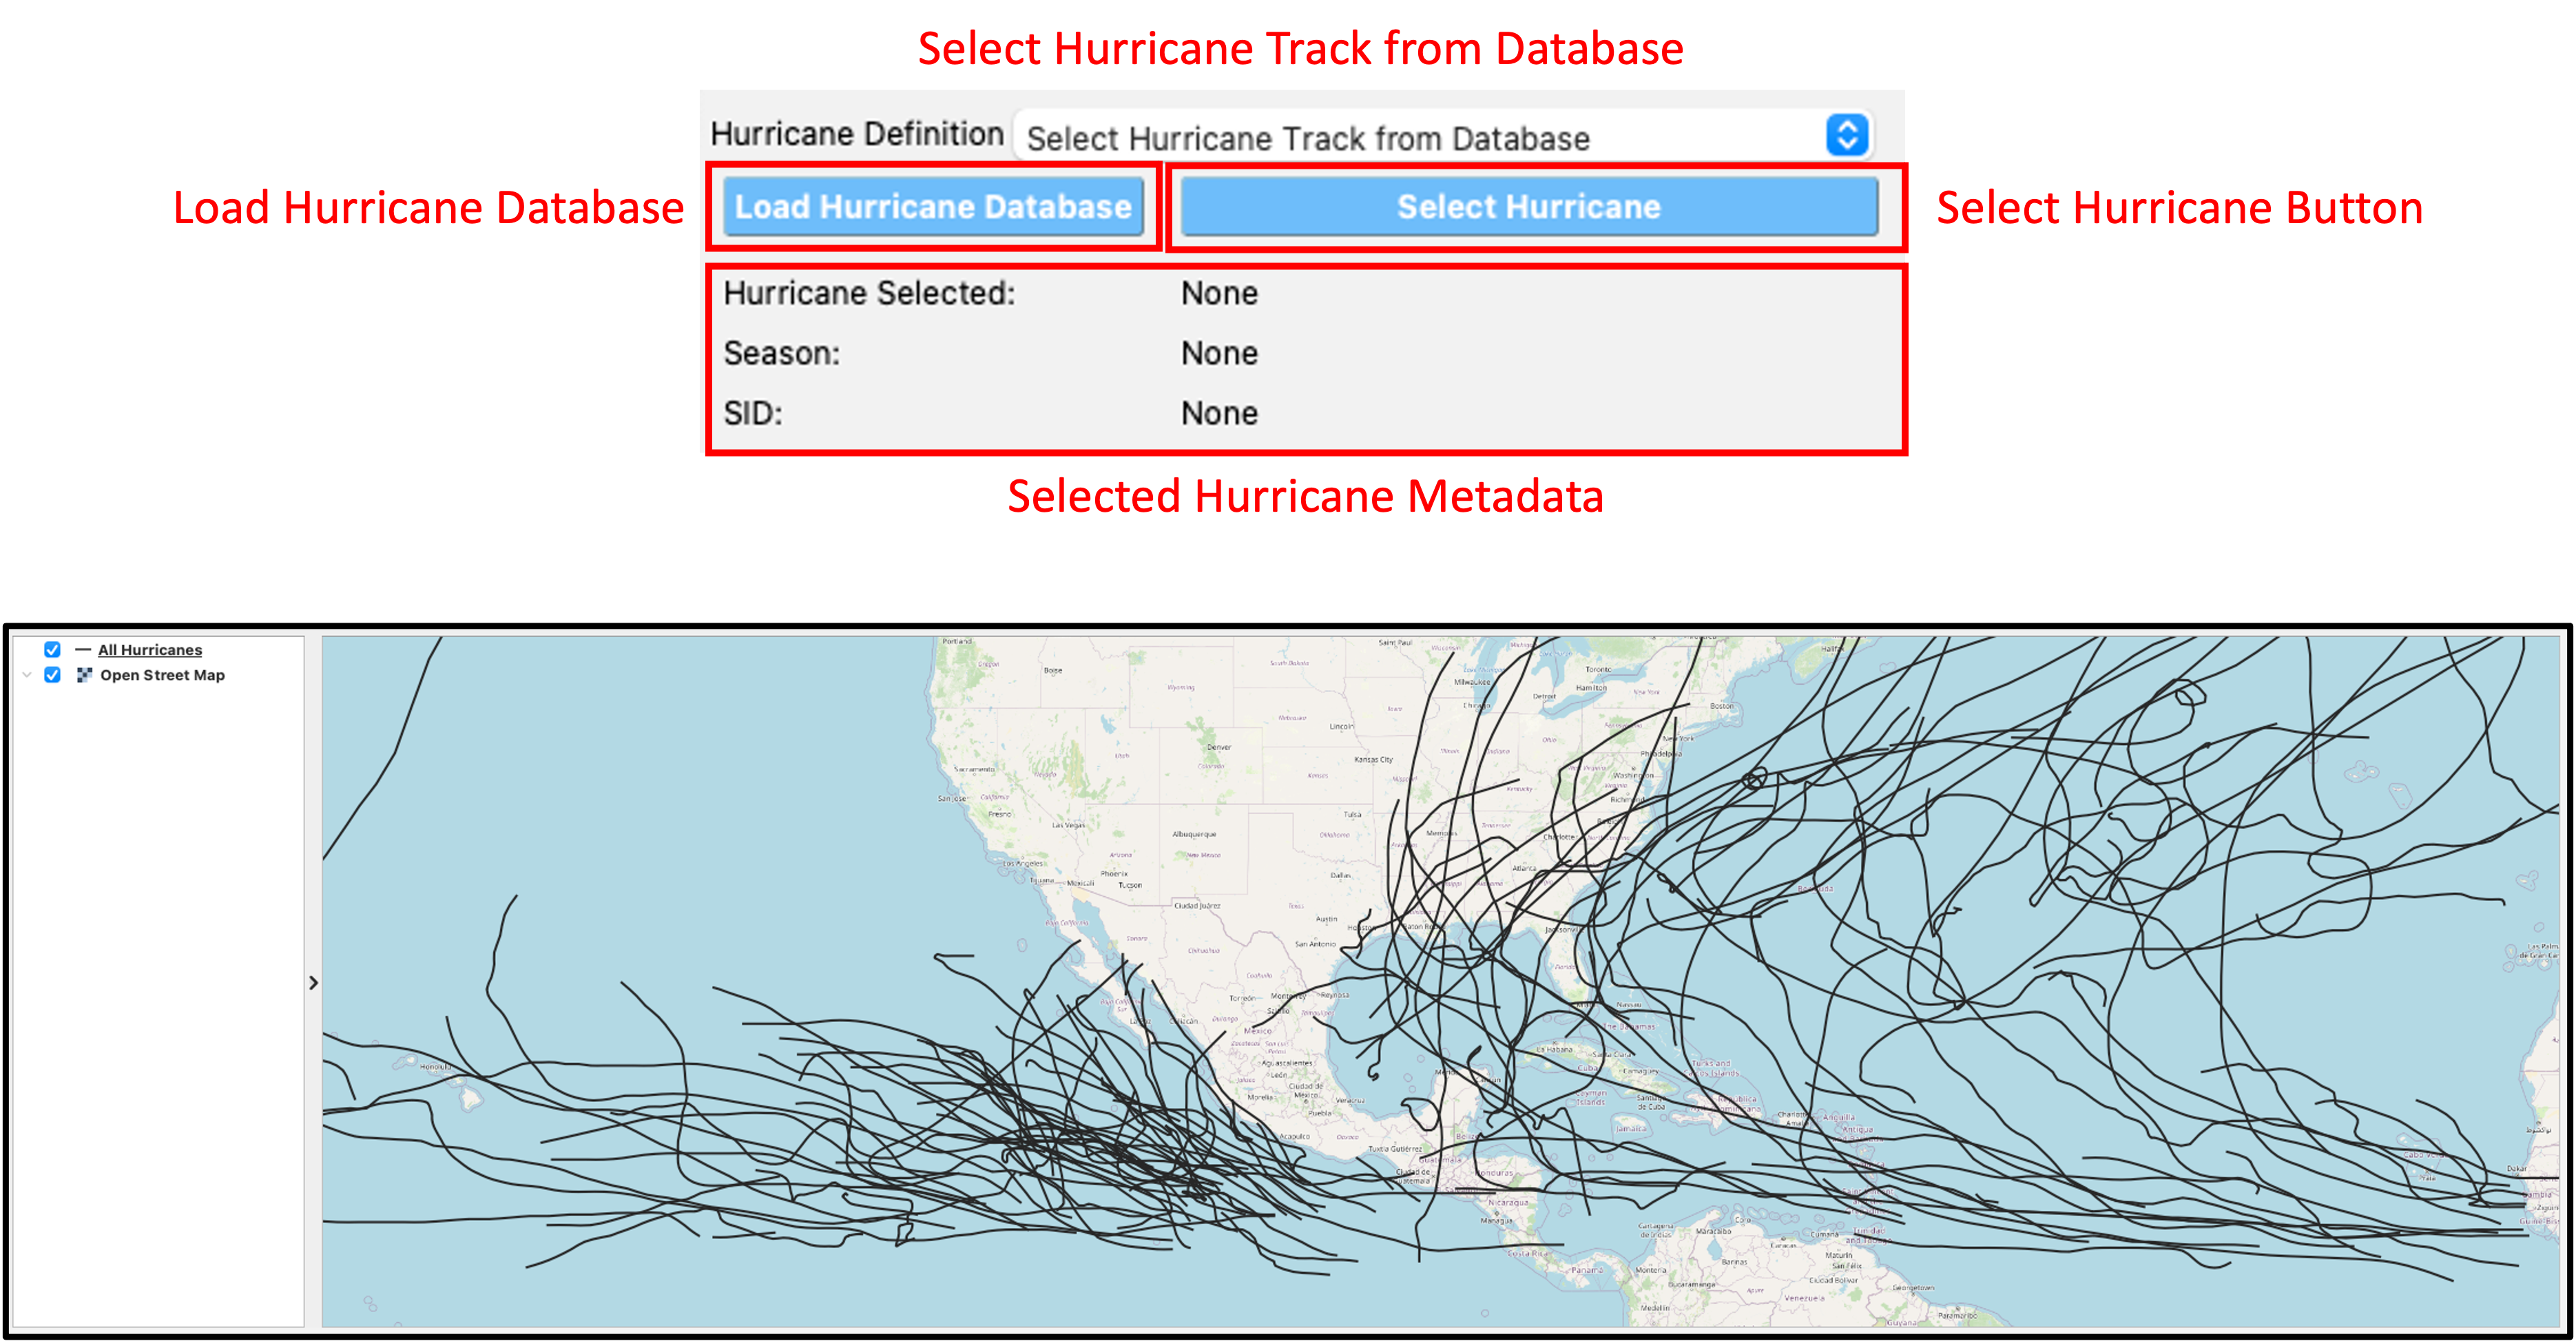 ../../../../../_images/R2DHurricaneTrackDB.png